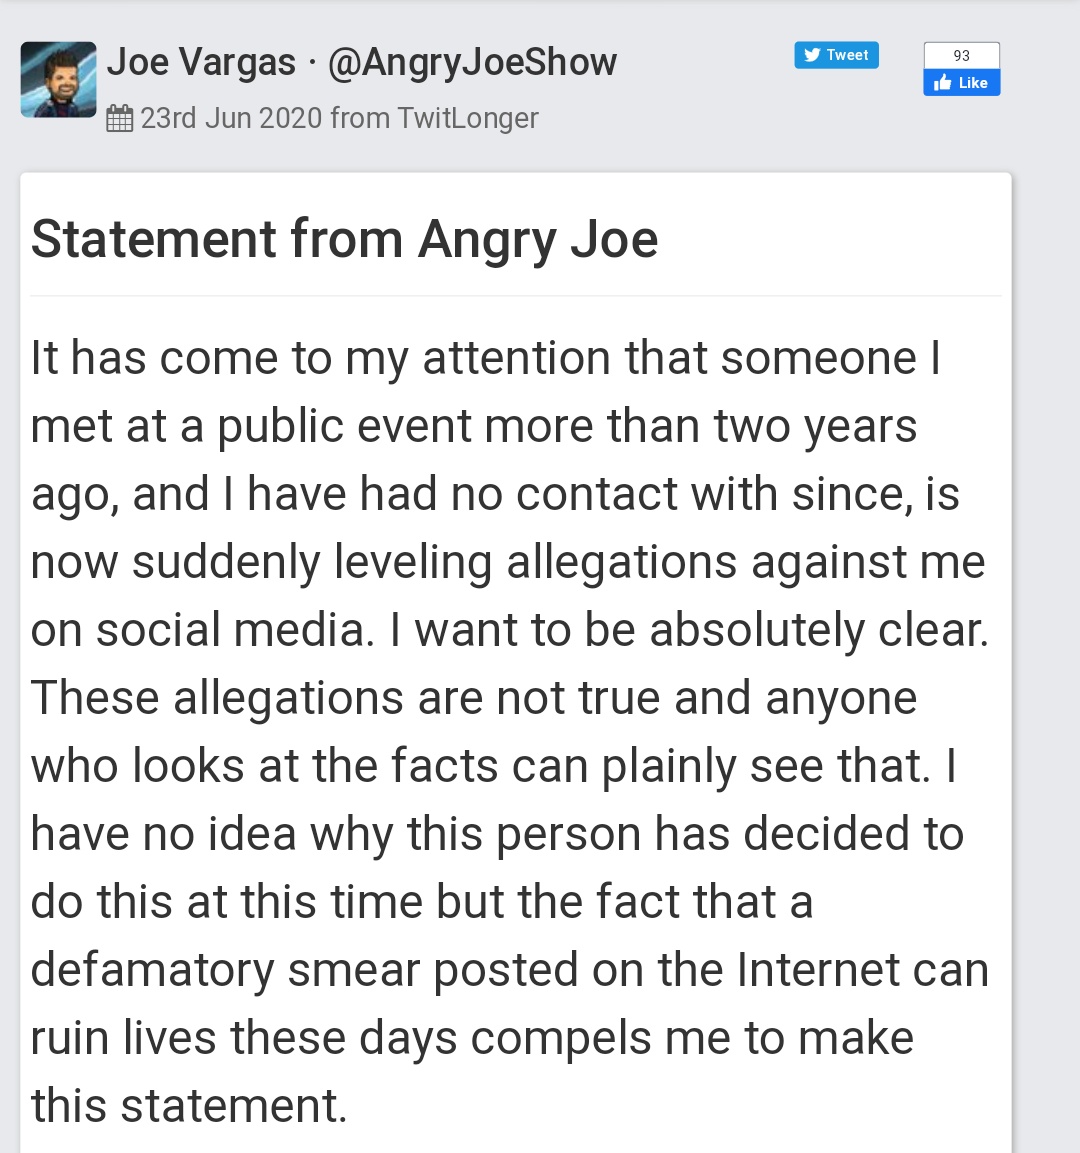 Here's a thread about people in gaming who've been accused of sexual misconduct/abuse who've denied the accusations.1. Angry Joe http://archive.fo/9mS2T 